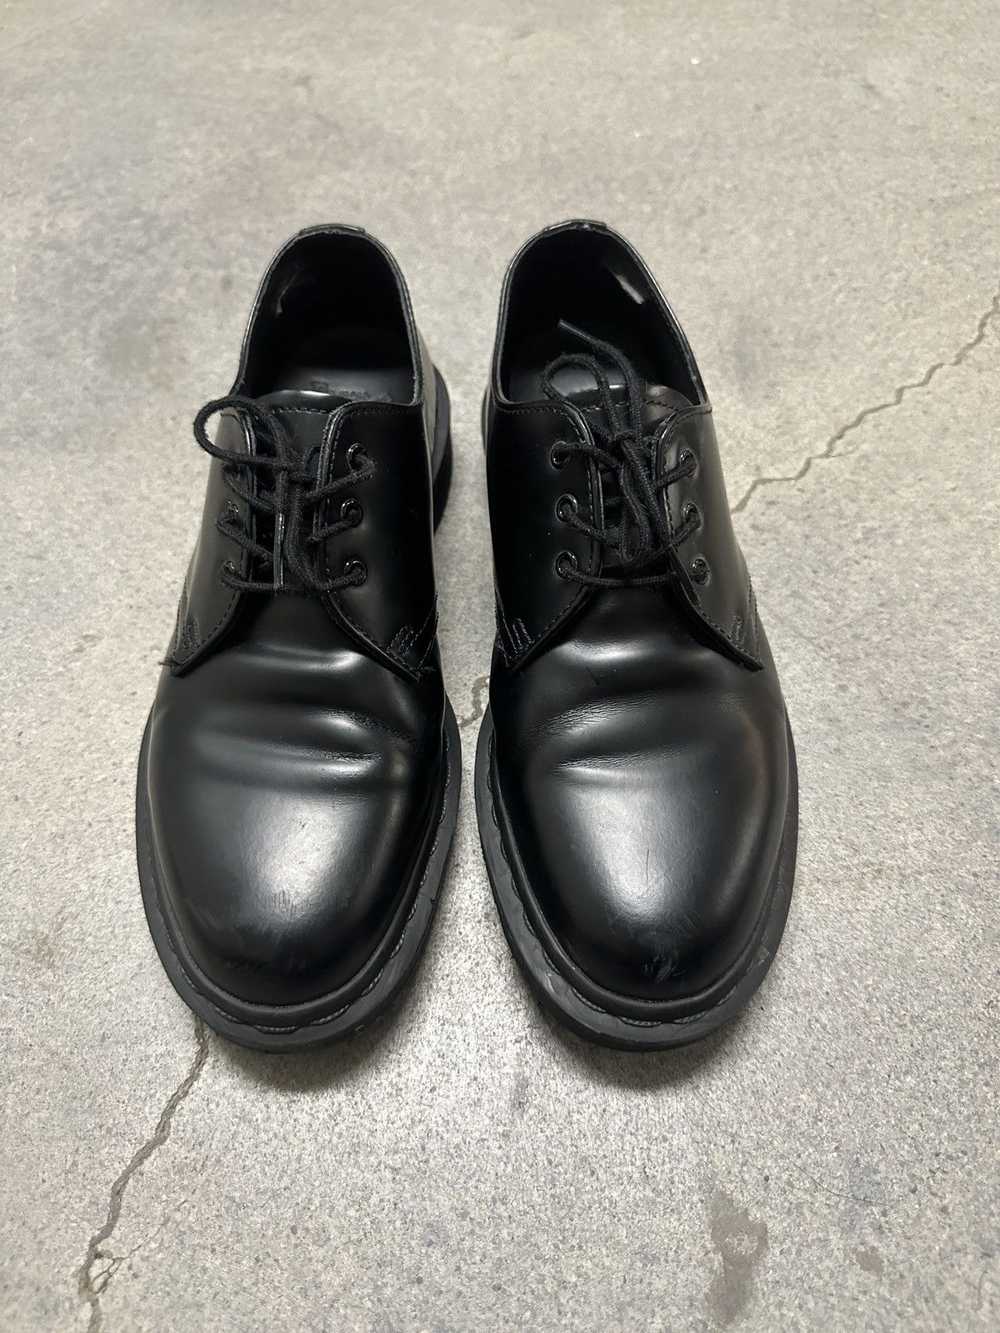 Dr. Martens 1461 Mono Smooth Leather Oxford Size 8 - image 2